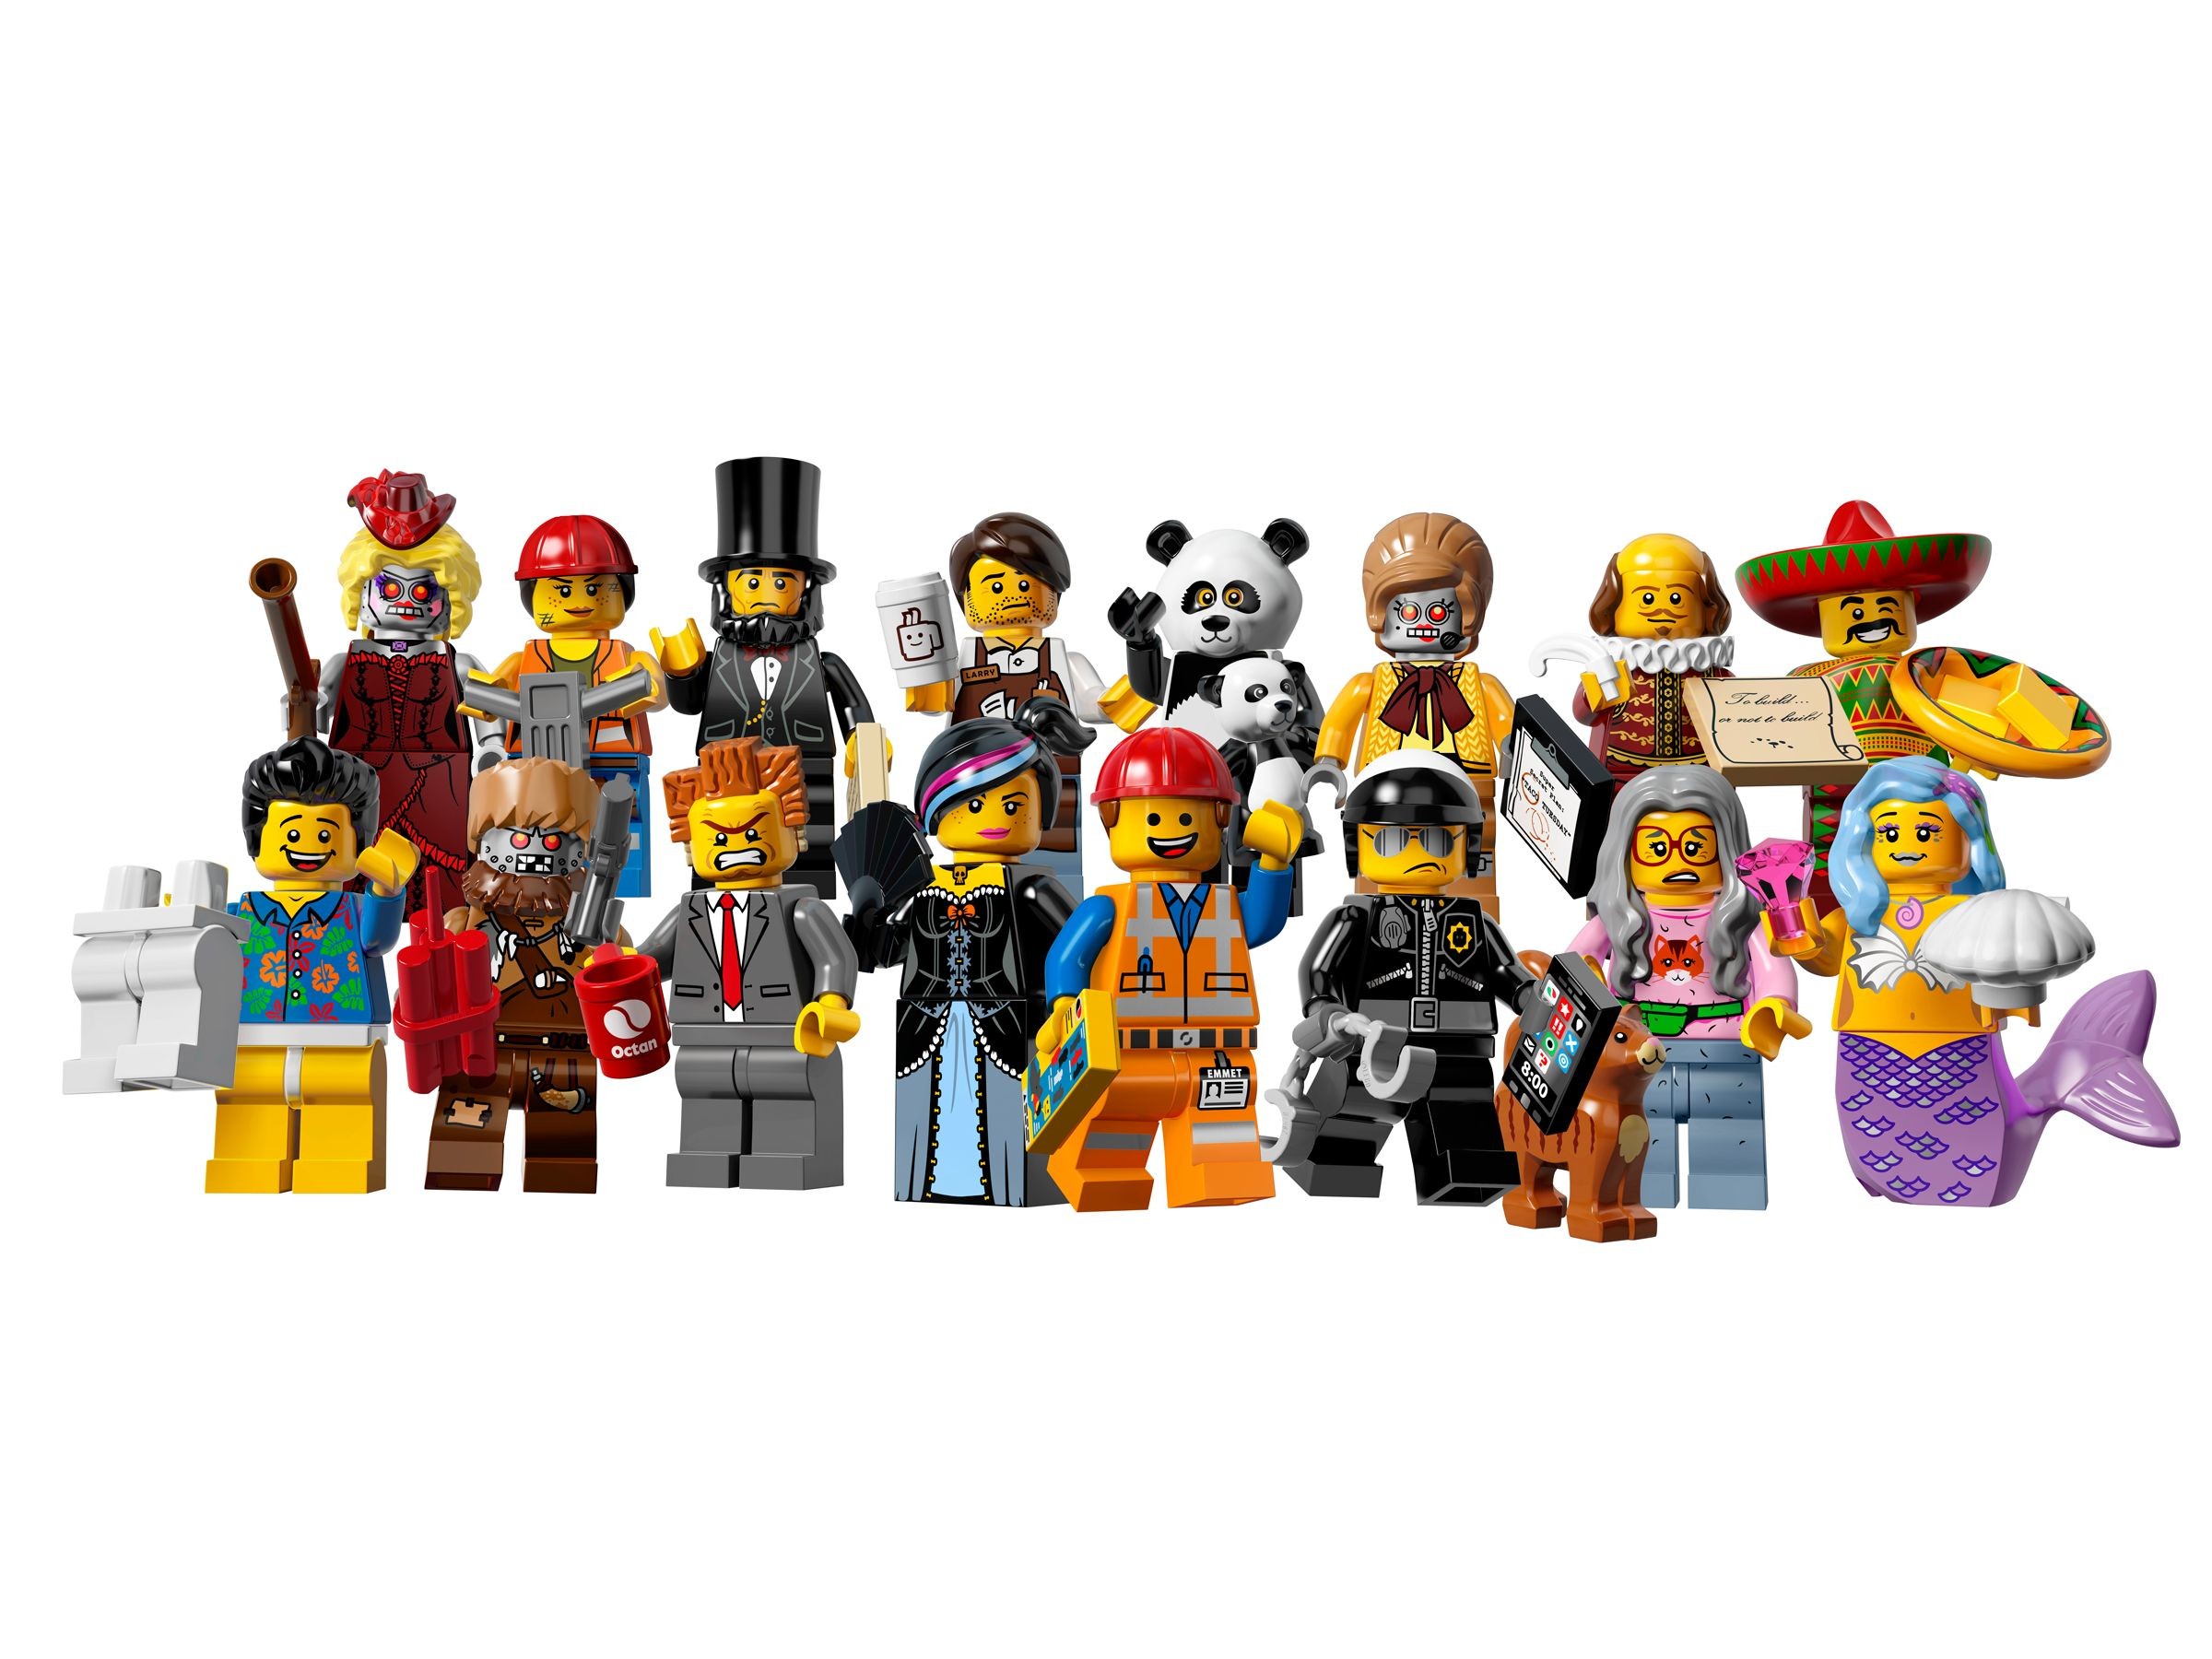 2400x1800 The Lego Emmet Lego Brickowski Wyldstyle Lucy Bad Cop Good Lord Business  Mrs. Larry Barista